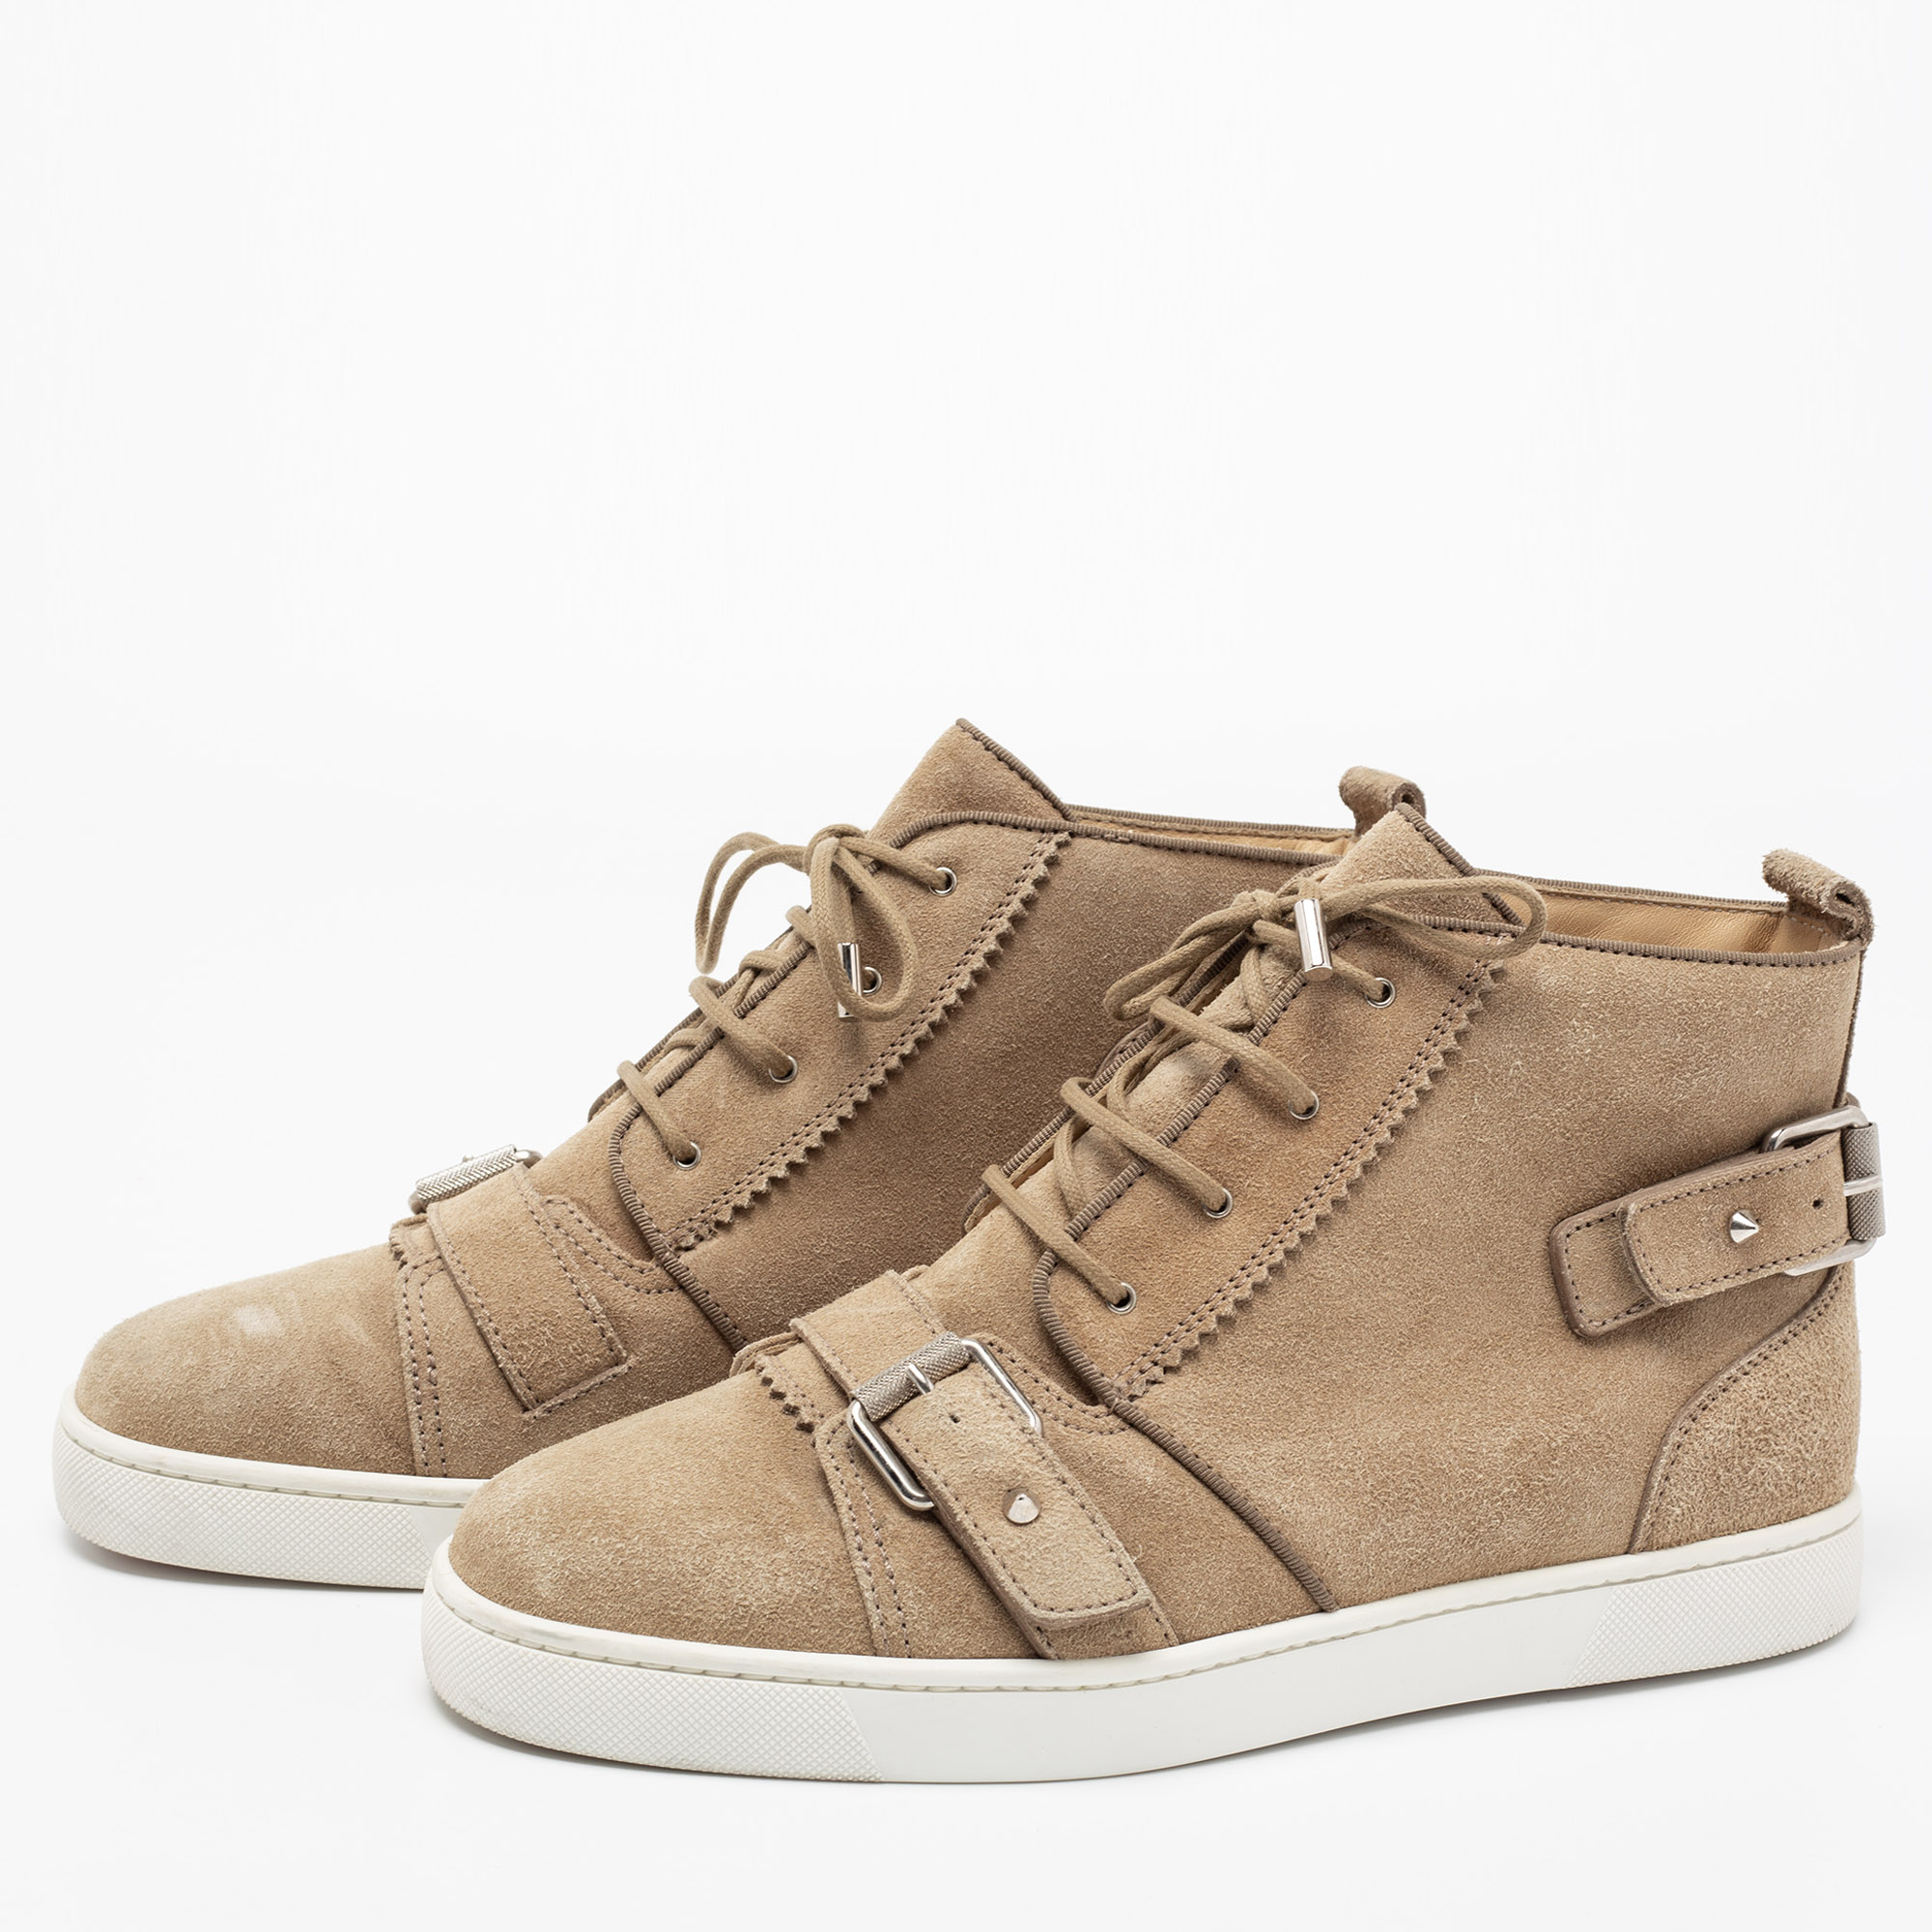 

Christian Louboutin Beige Suede Nono Strap Reglisse High Top Sneakers Size